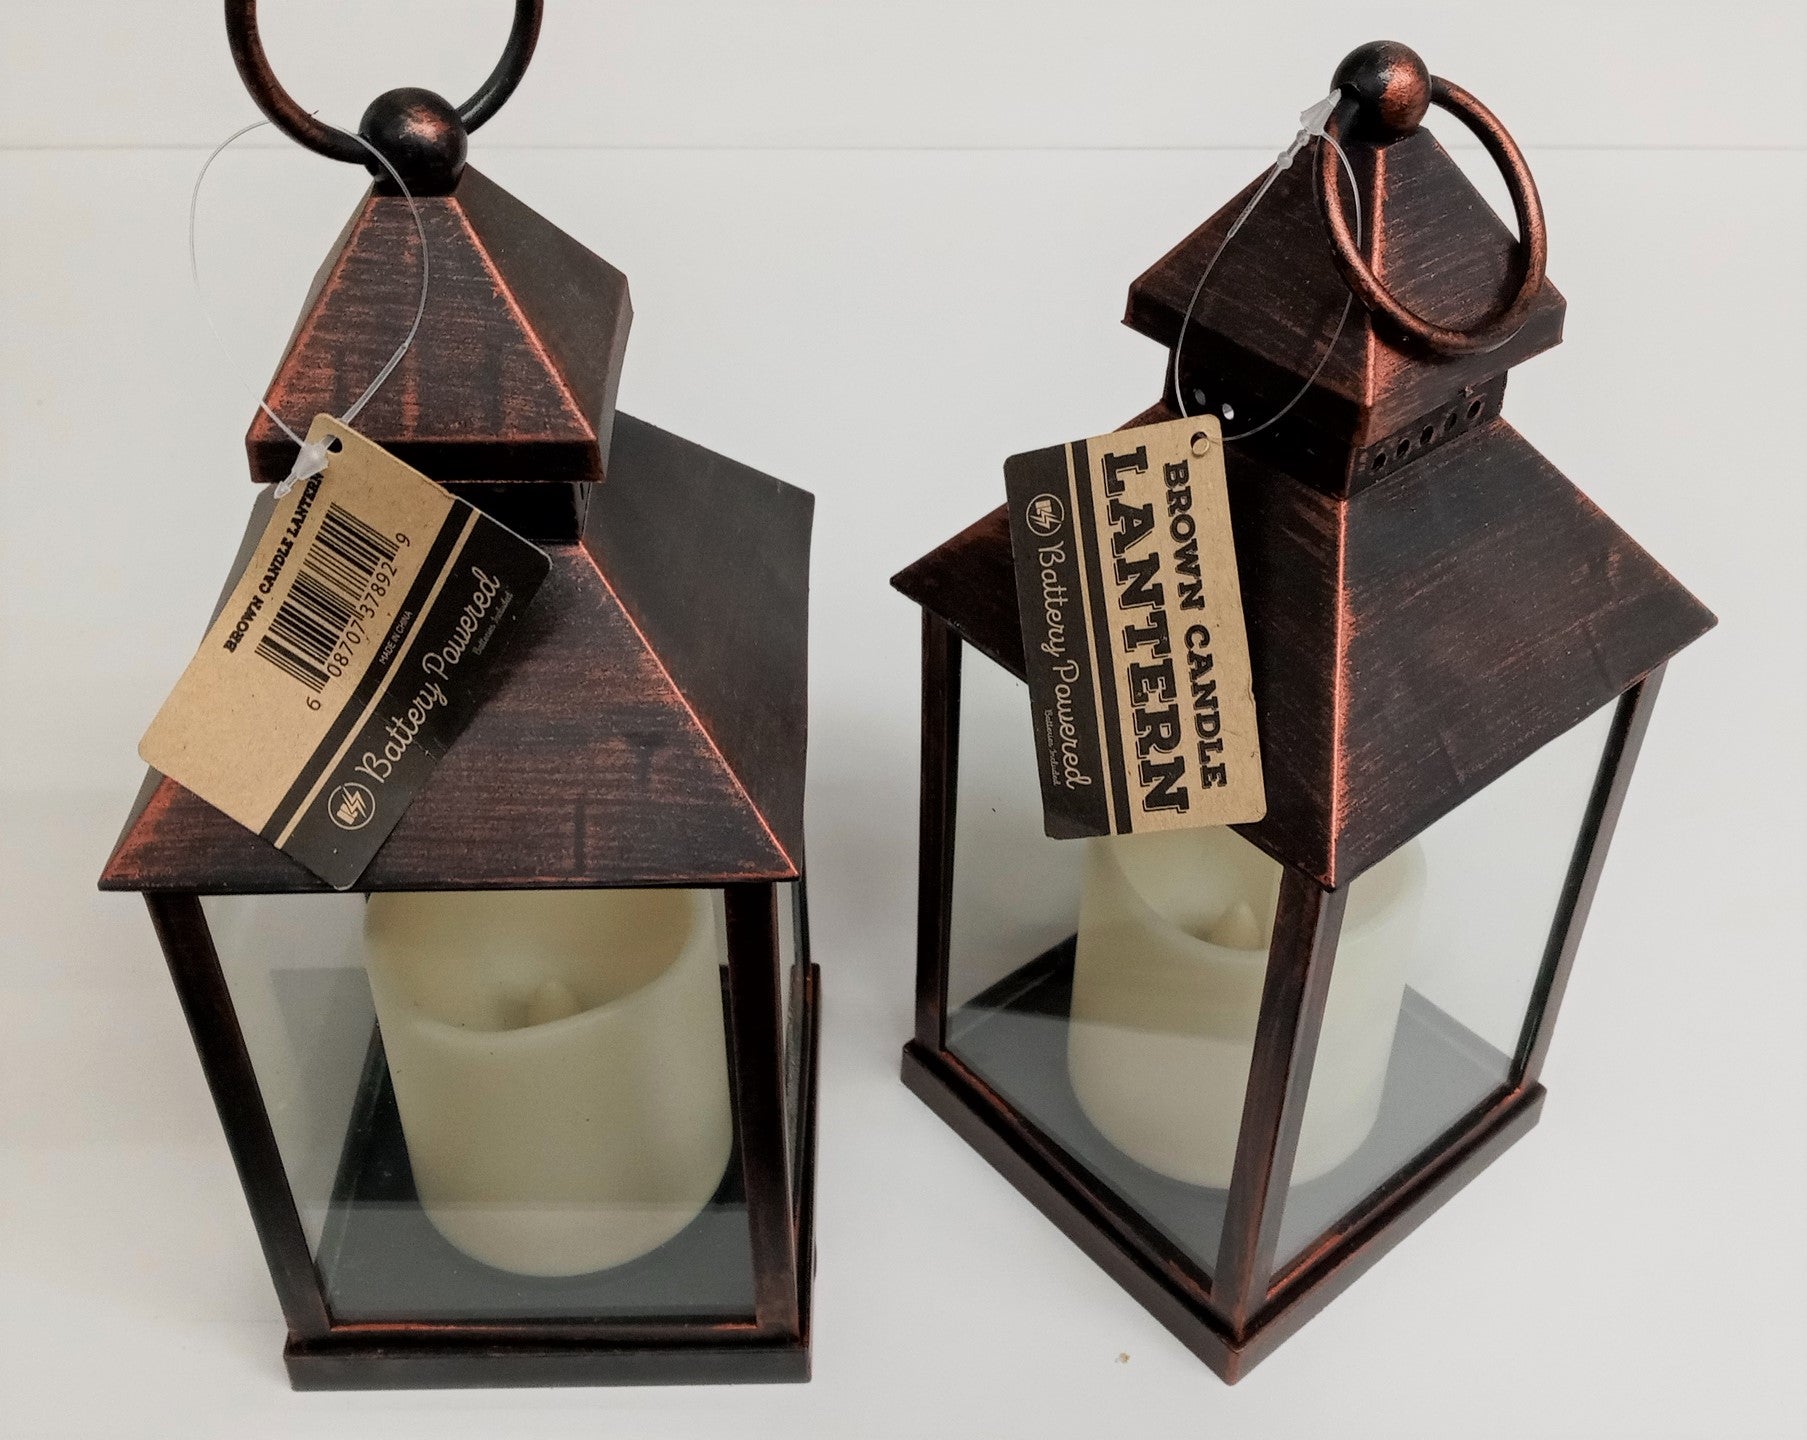 Decorative Brown Lantern 37892 With Battery Operated Candle 9-1/2" 2pcs